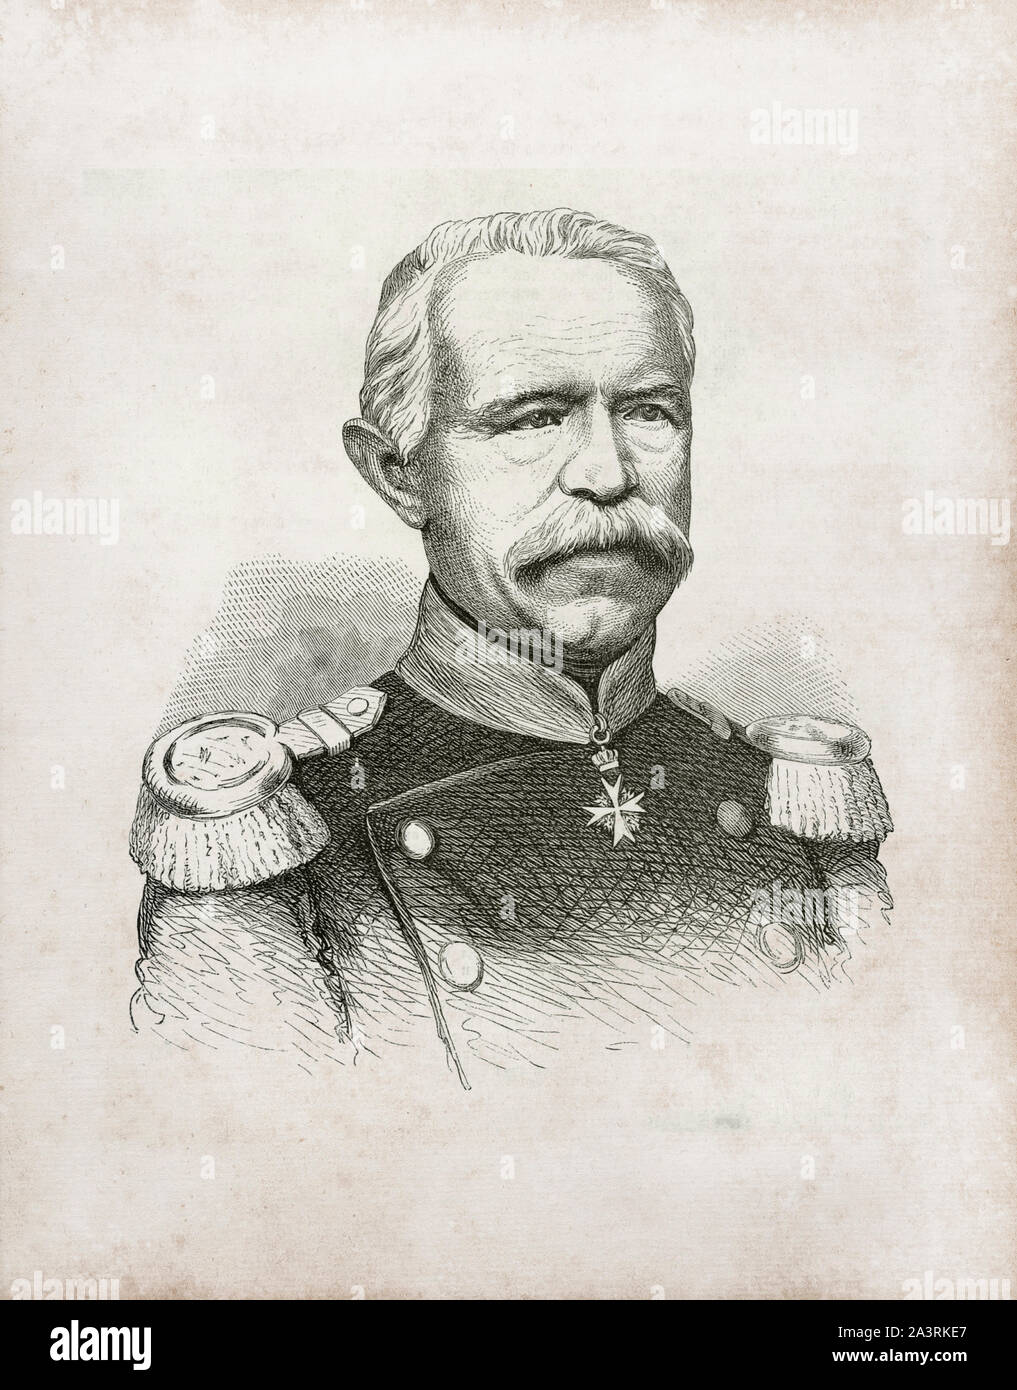 Eduard Wilhelm Ludwig von Bonin (1793 – 1865) was a Prussian general officer who served as Prussian Minister of War from 1852–54 and 1858-59. Stock Photo